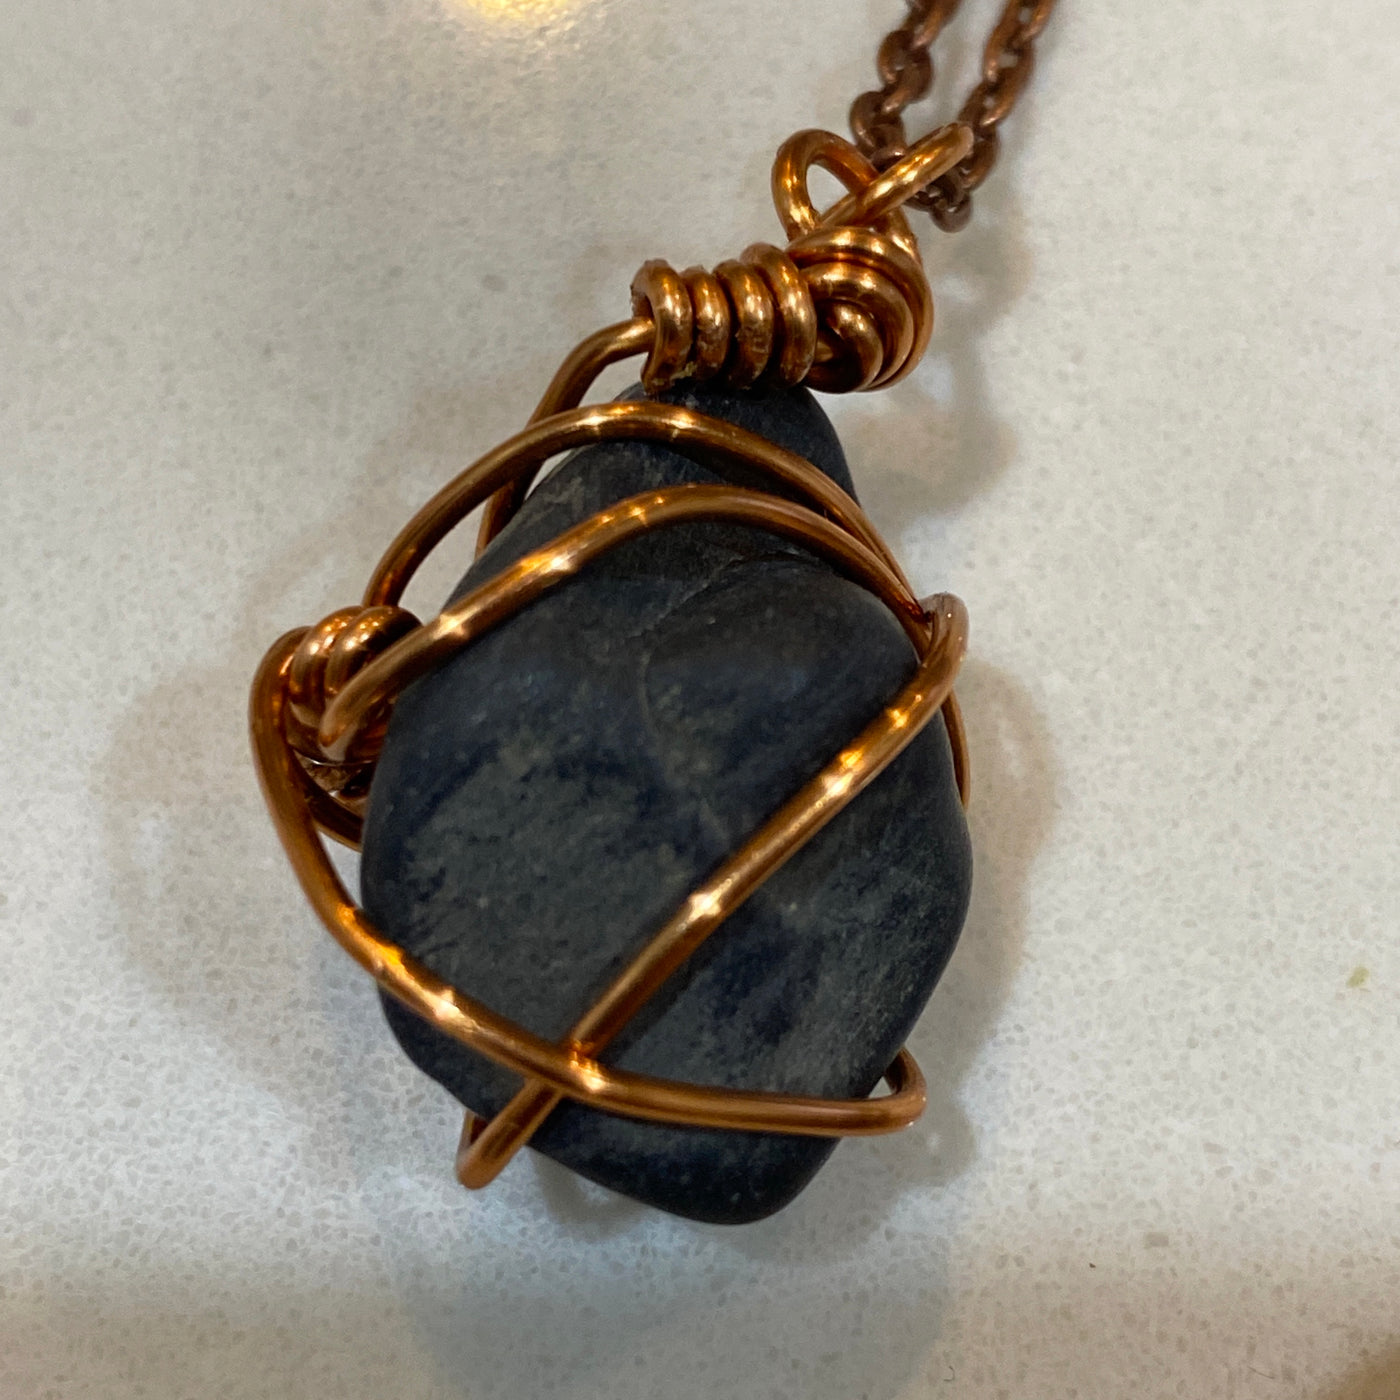 Black natural stone and wire on chain. Small stone pendant.